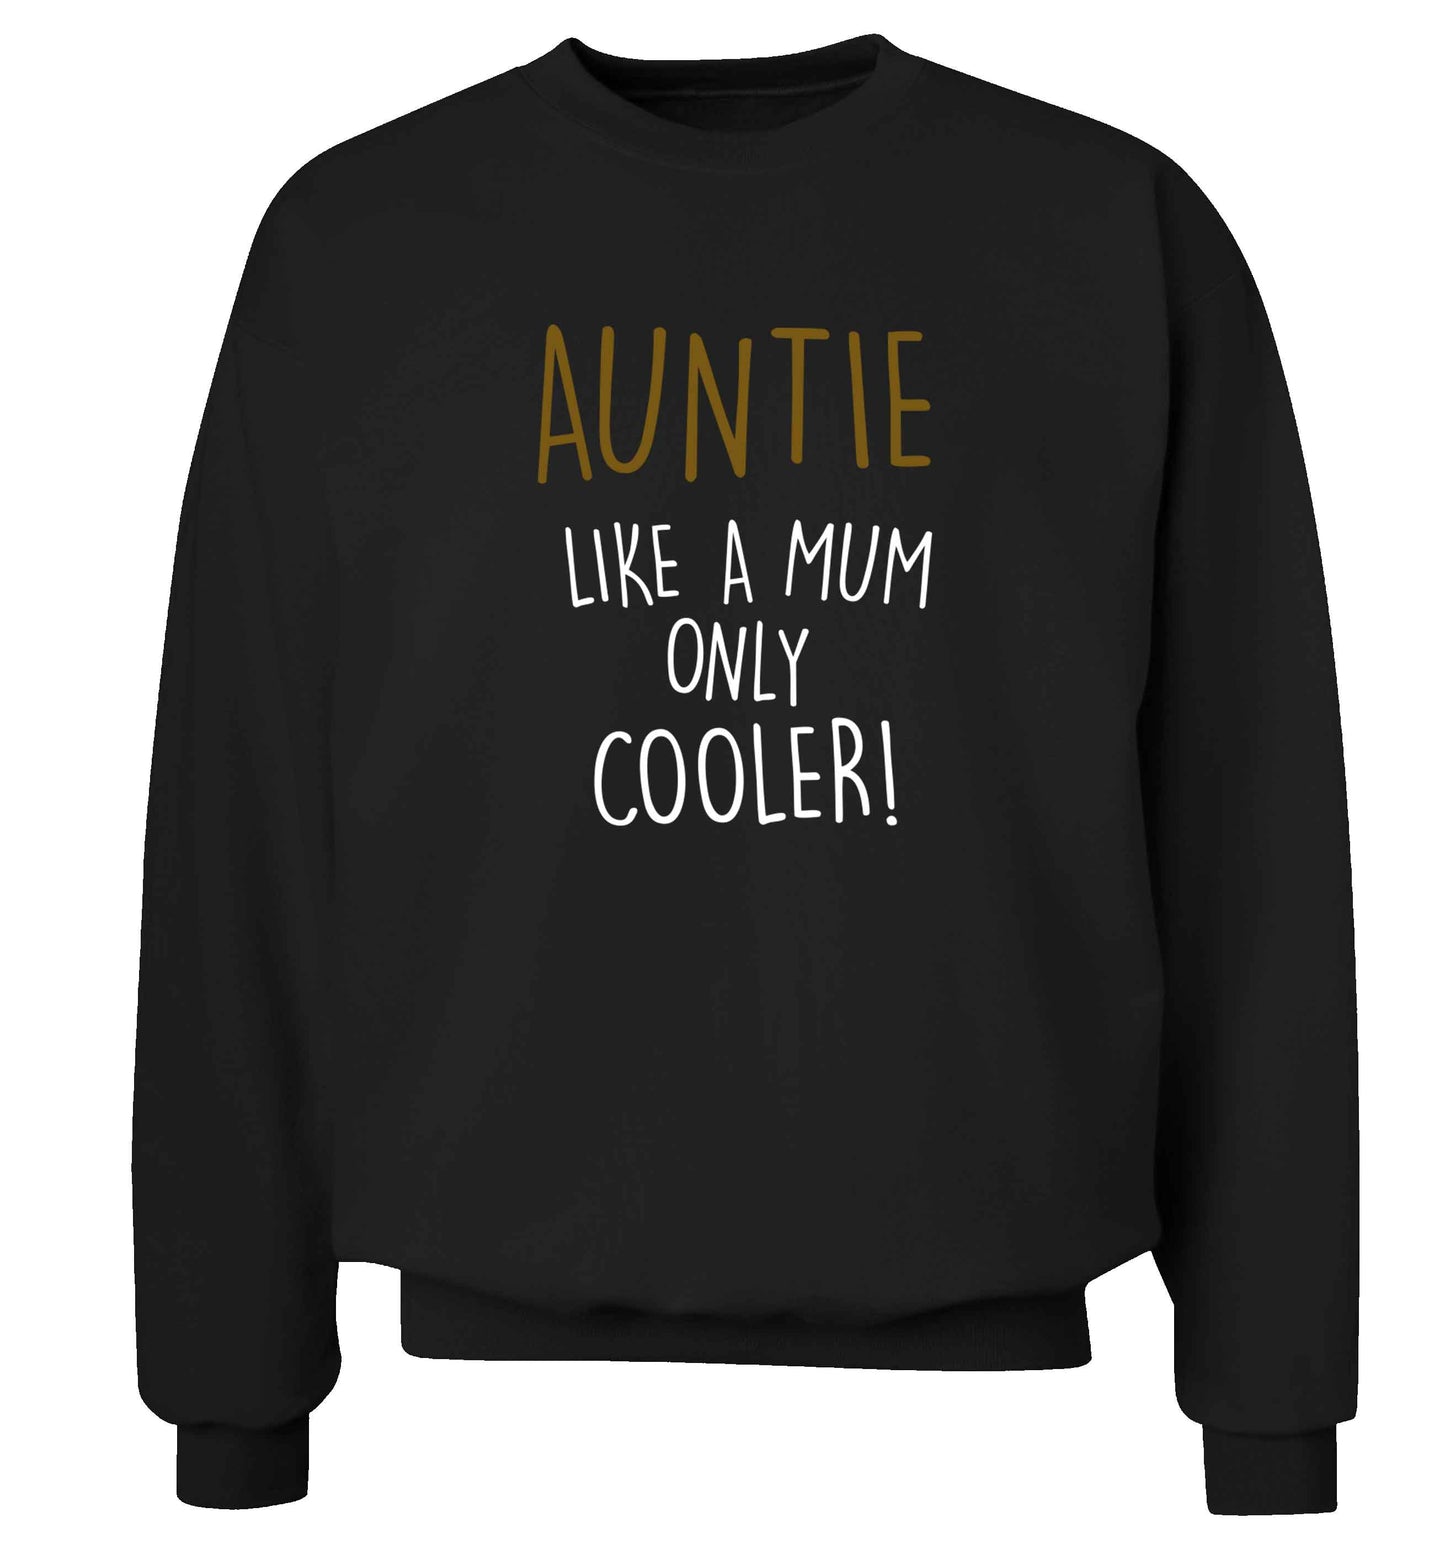 Auntie like a mum only cooler adult's unisex black sweater 2XL